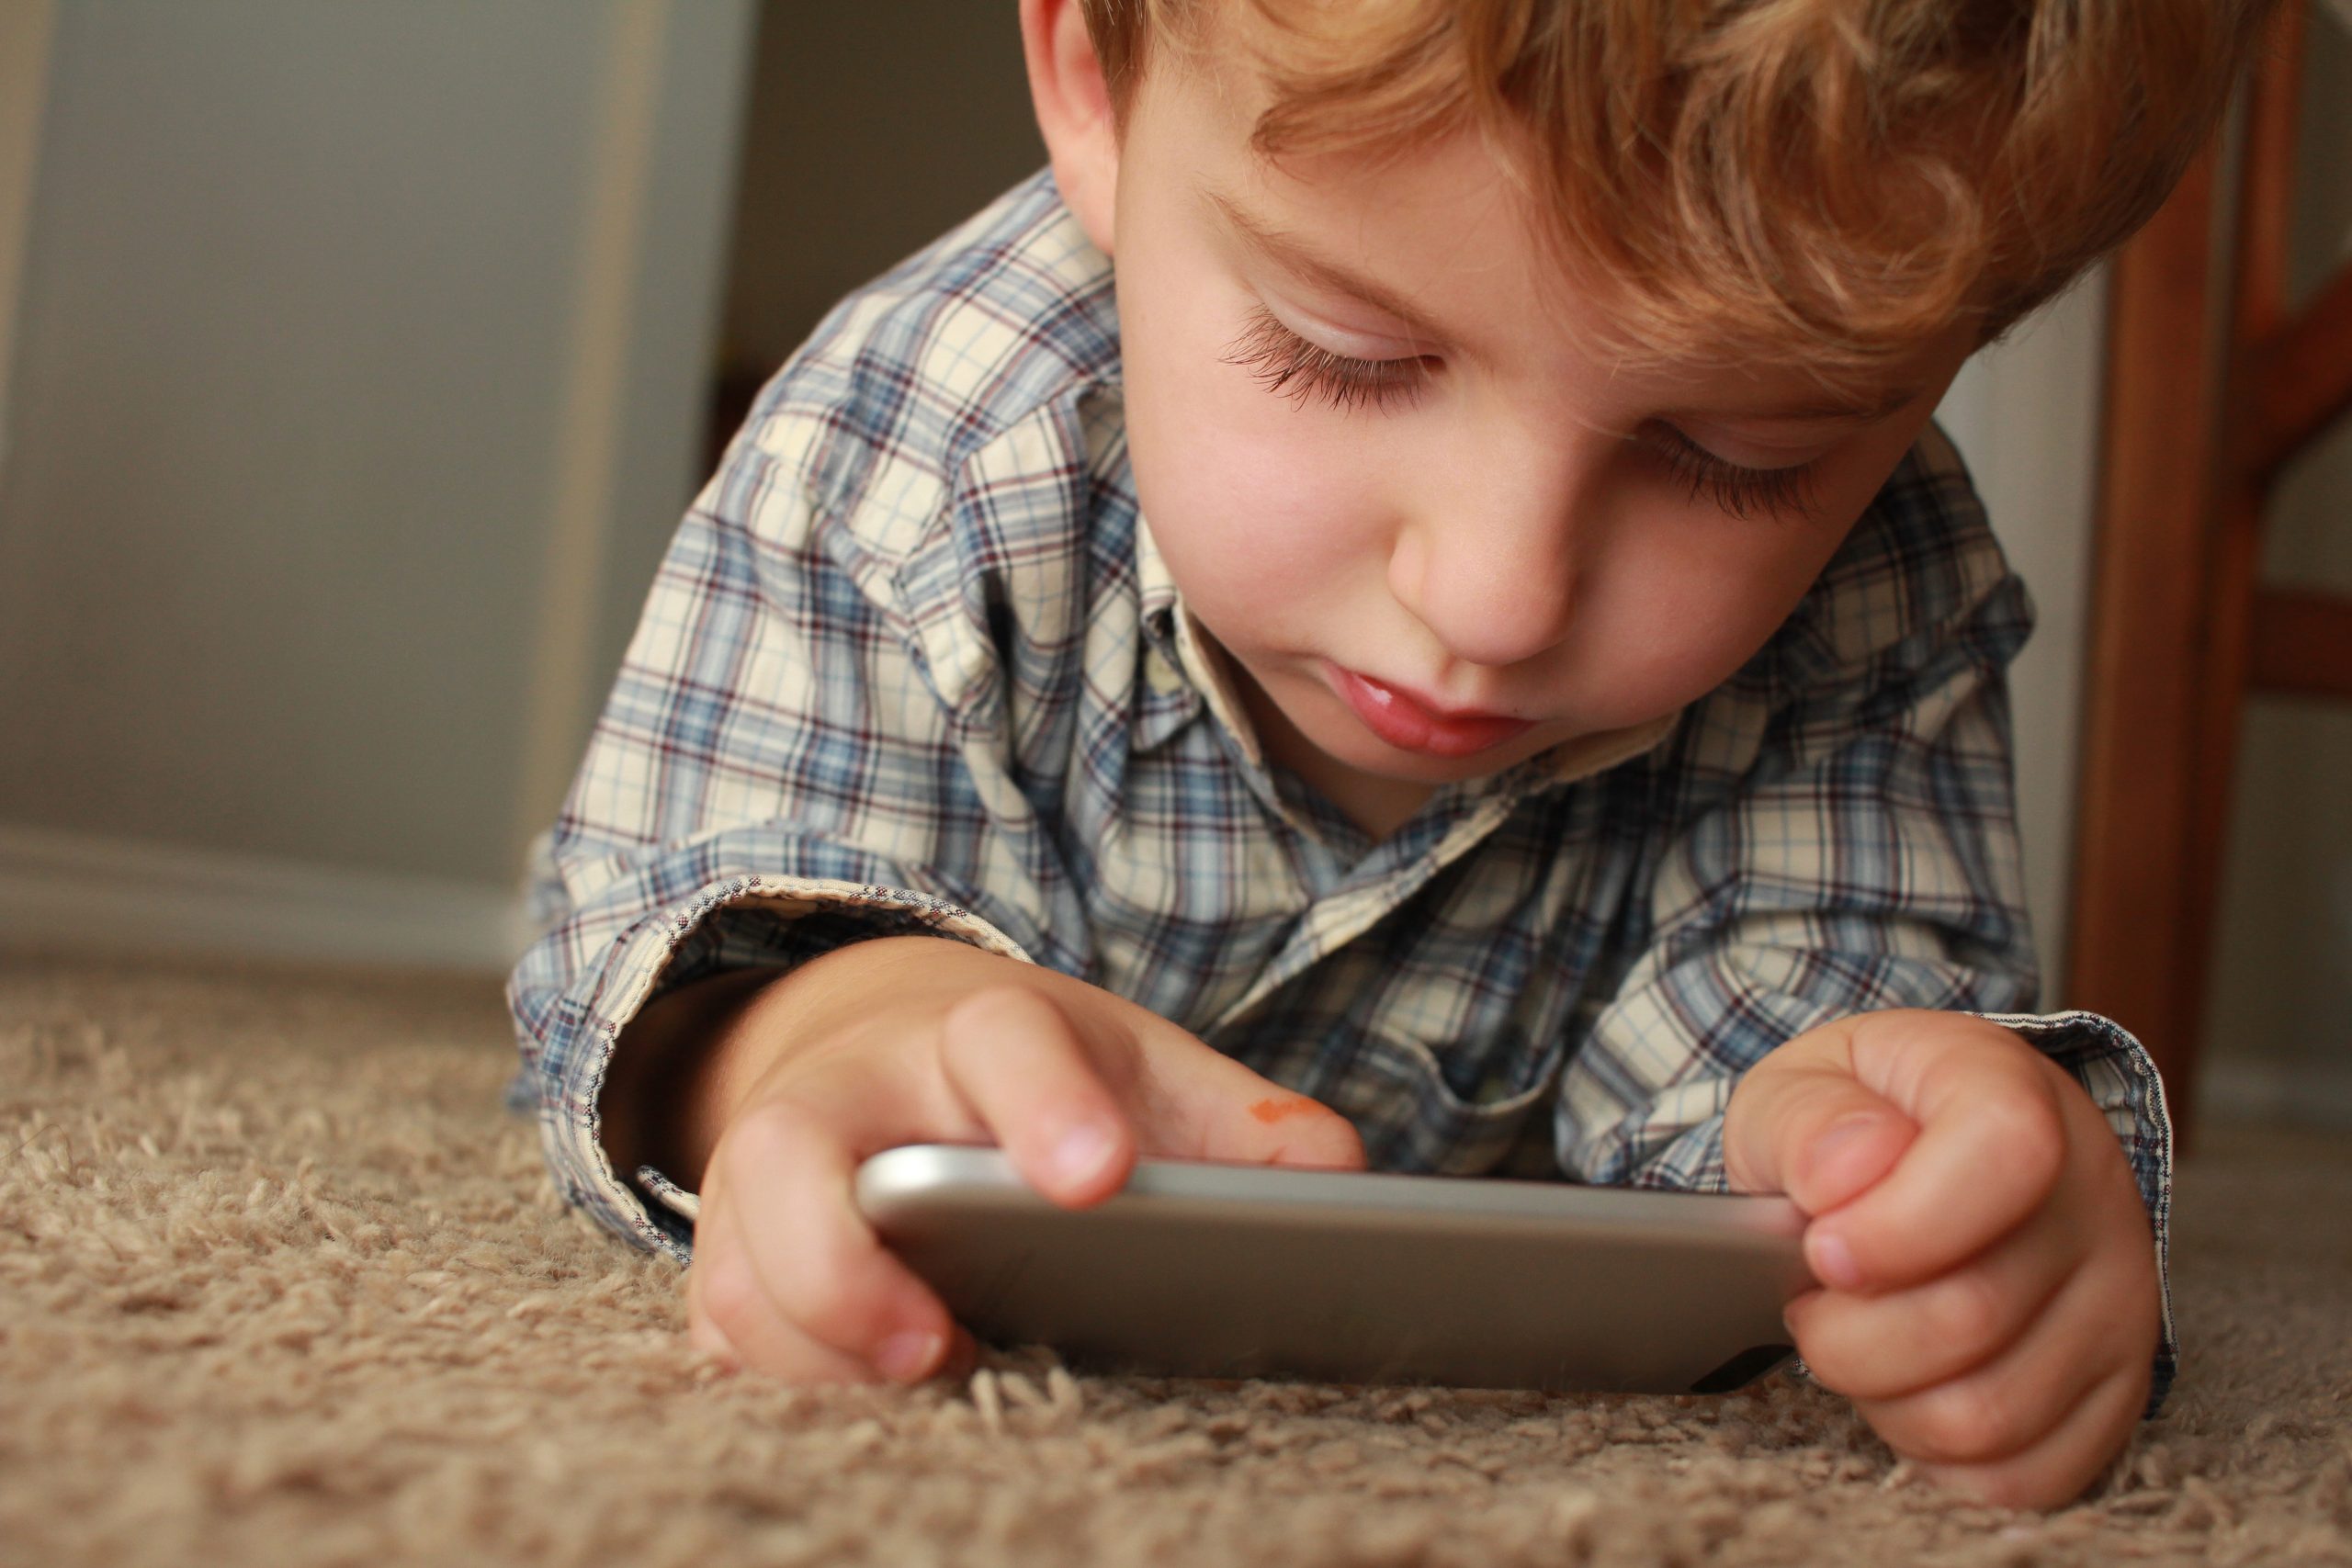 The Skinny on Screen Time: Common Sense Over Research (at least for now) post thumbnail